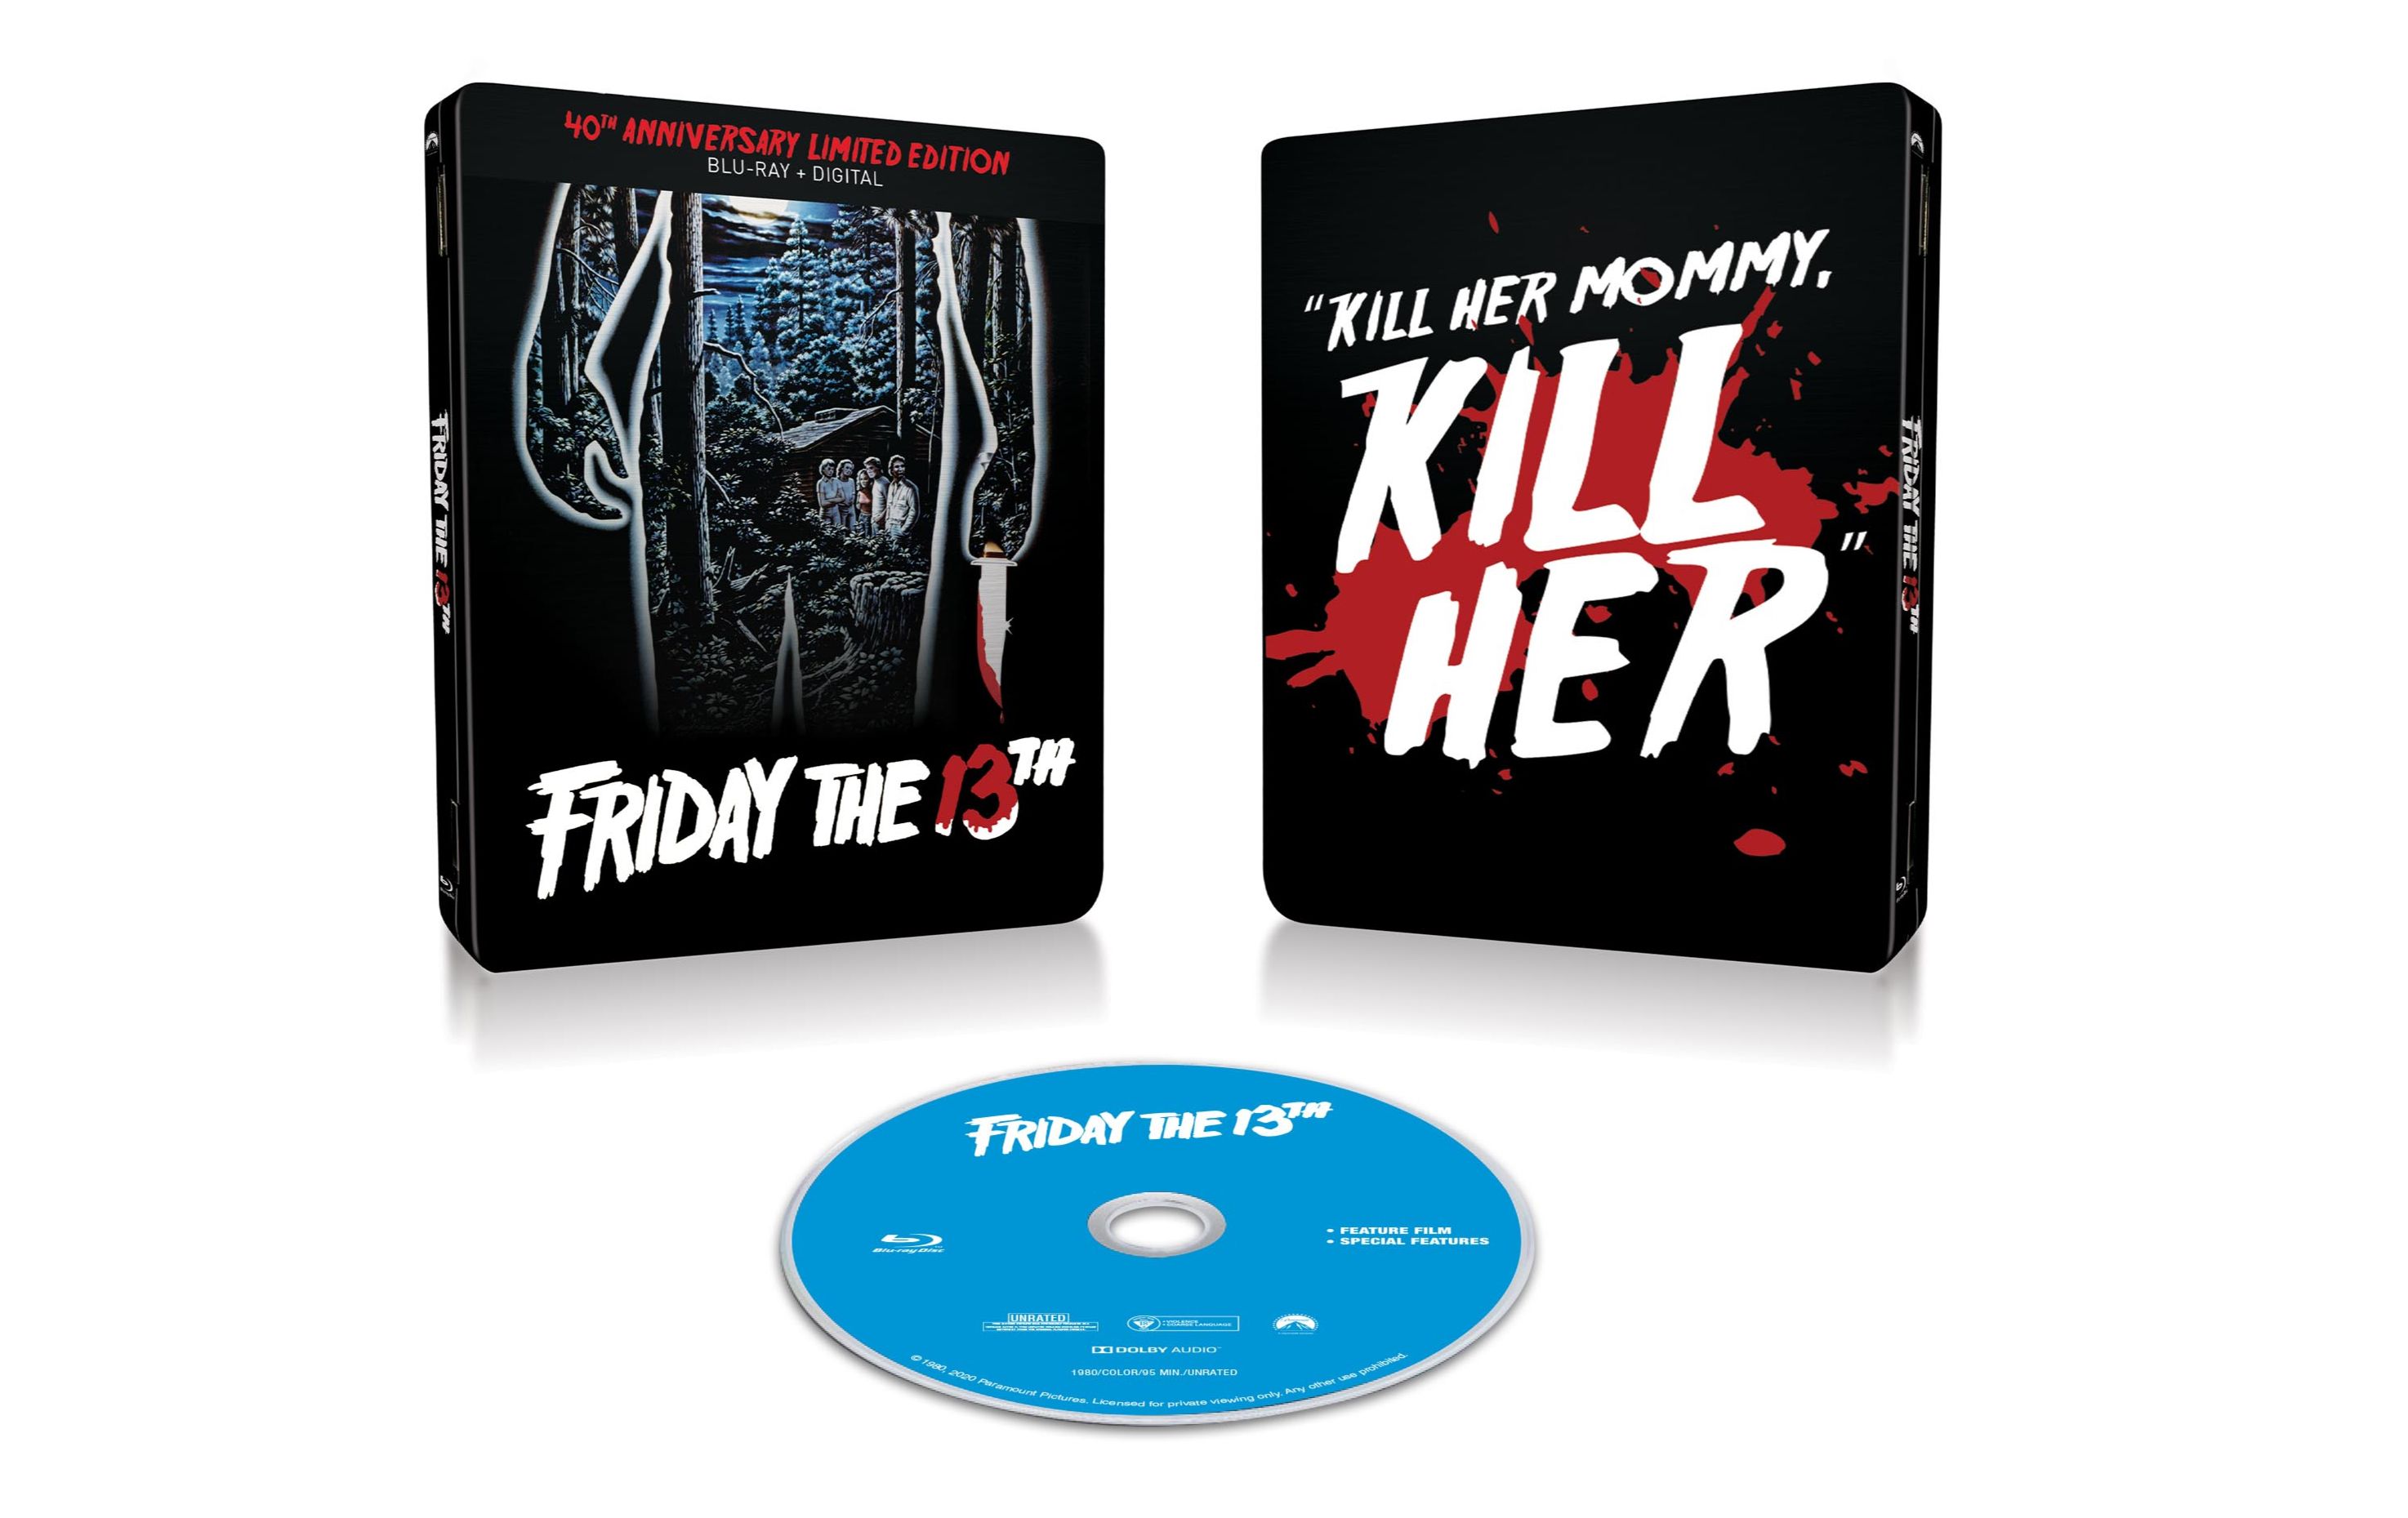 Friday the 13th 40th Anniversay Limited Edition Steelbook Blu-Ray